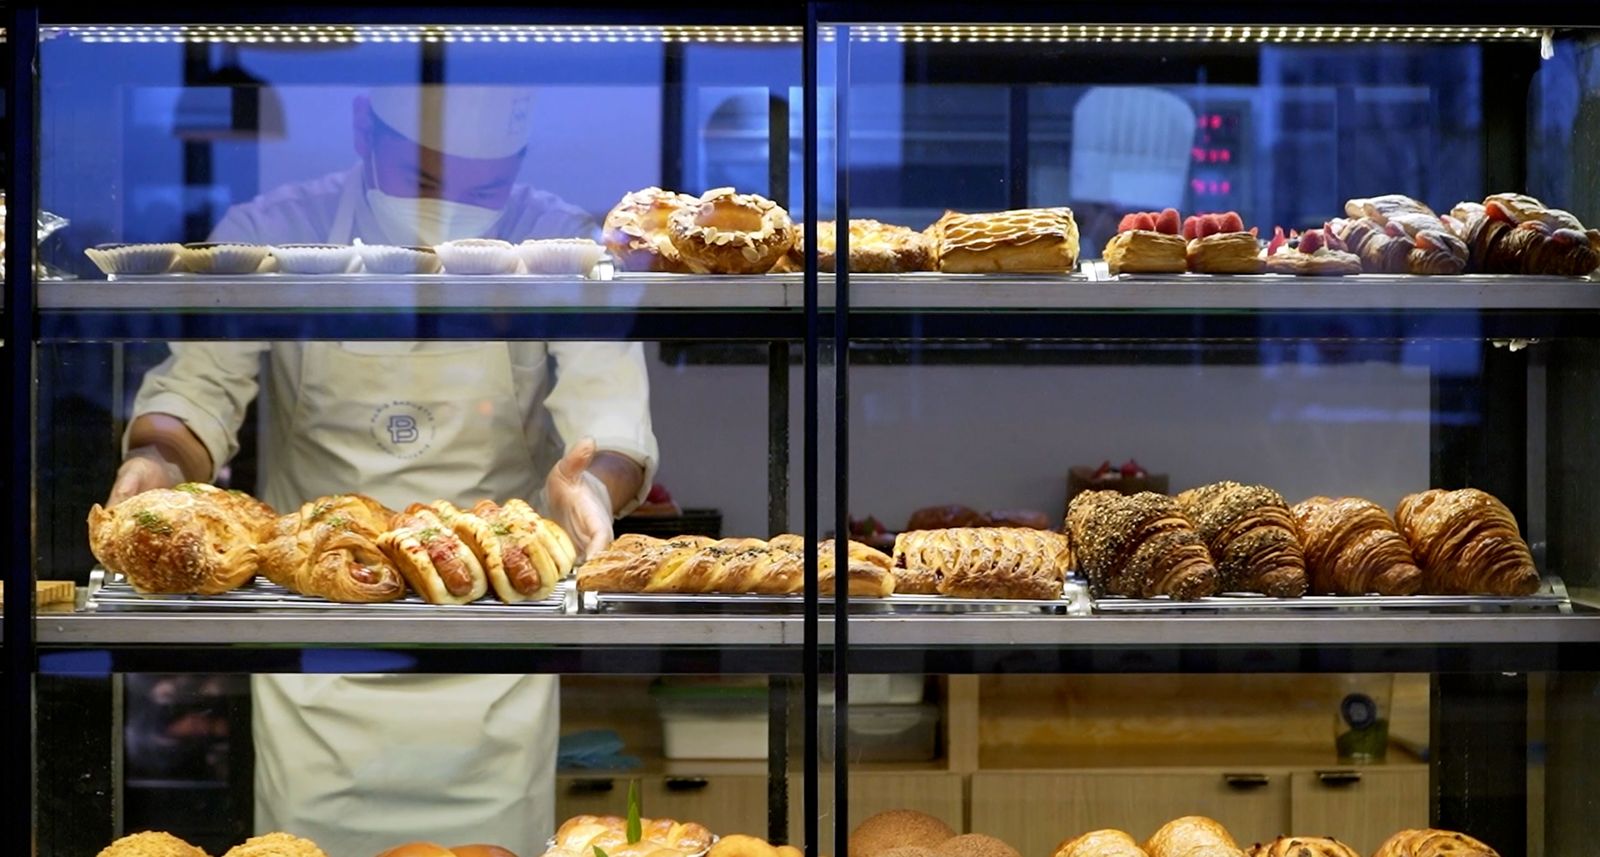 Paris Baguette Continues To Dominate the Bakery Franchise Industry; New Bakery Café Set to Open in Cincinnati, Ohio, on November 27th